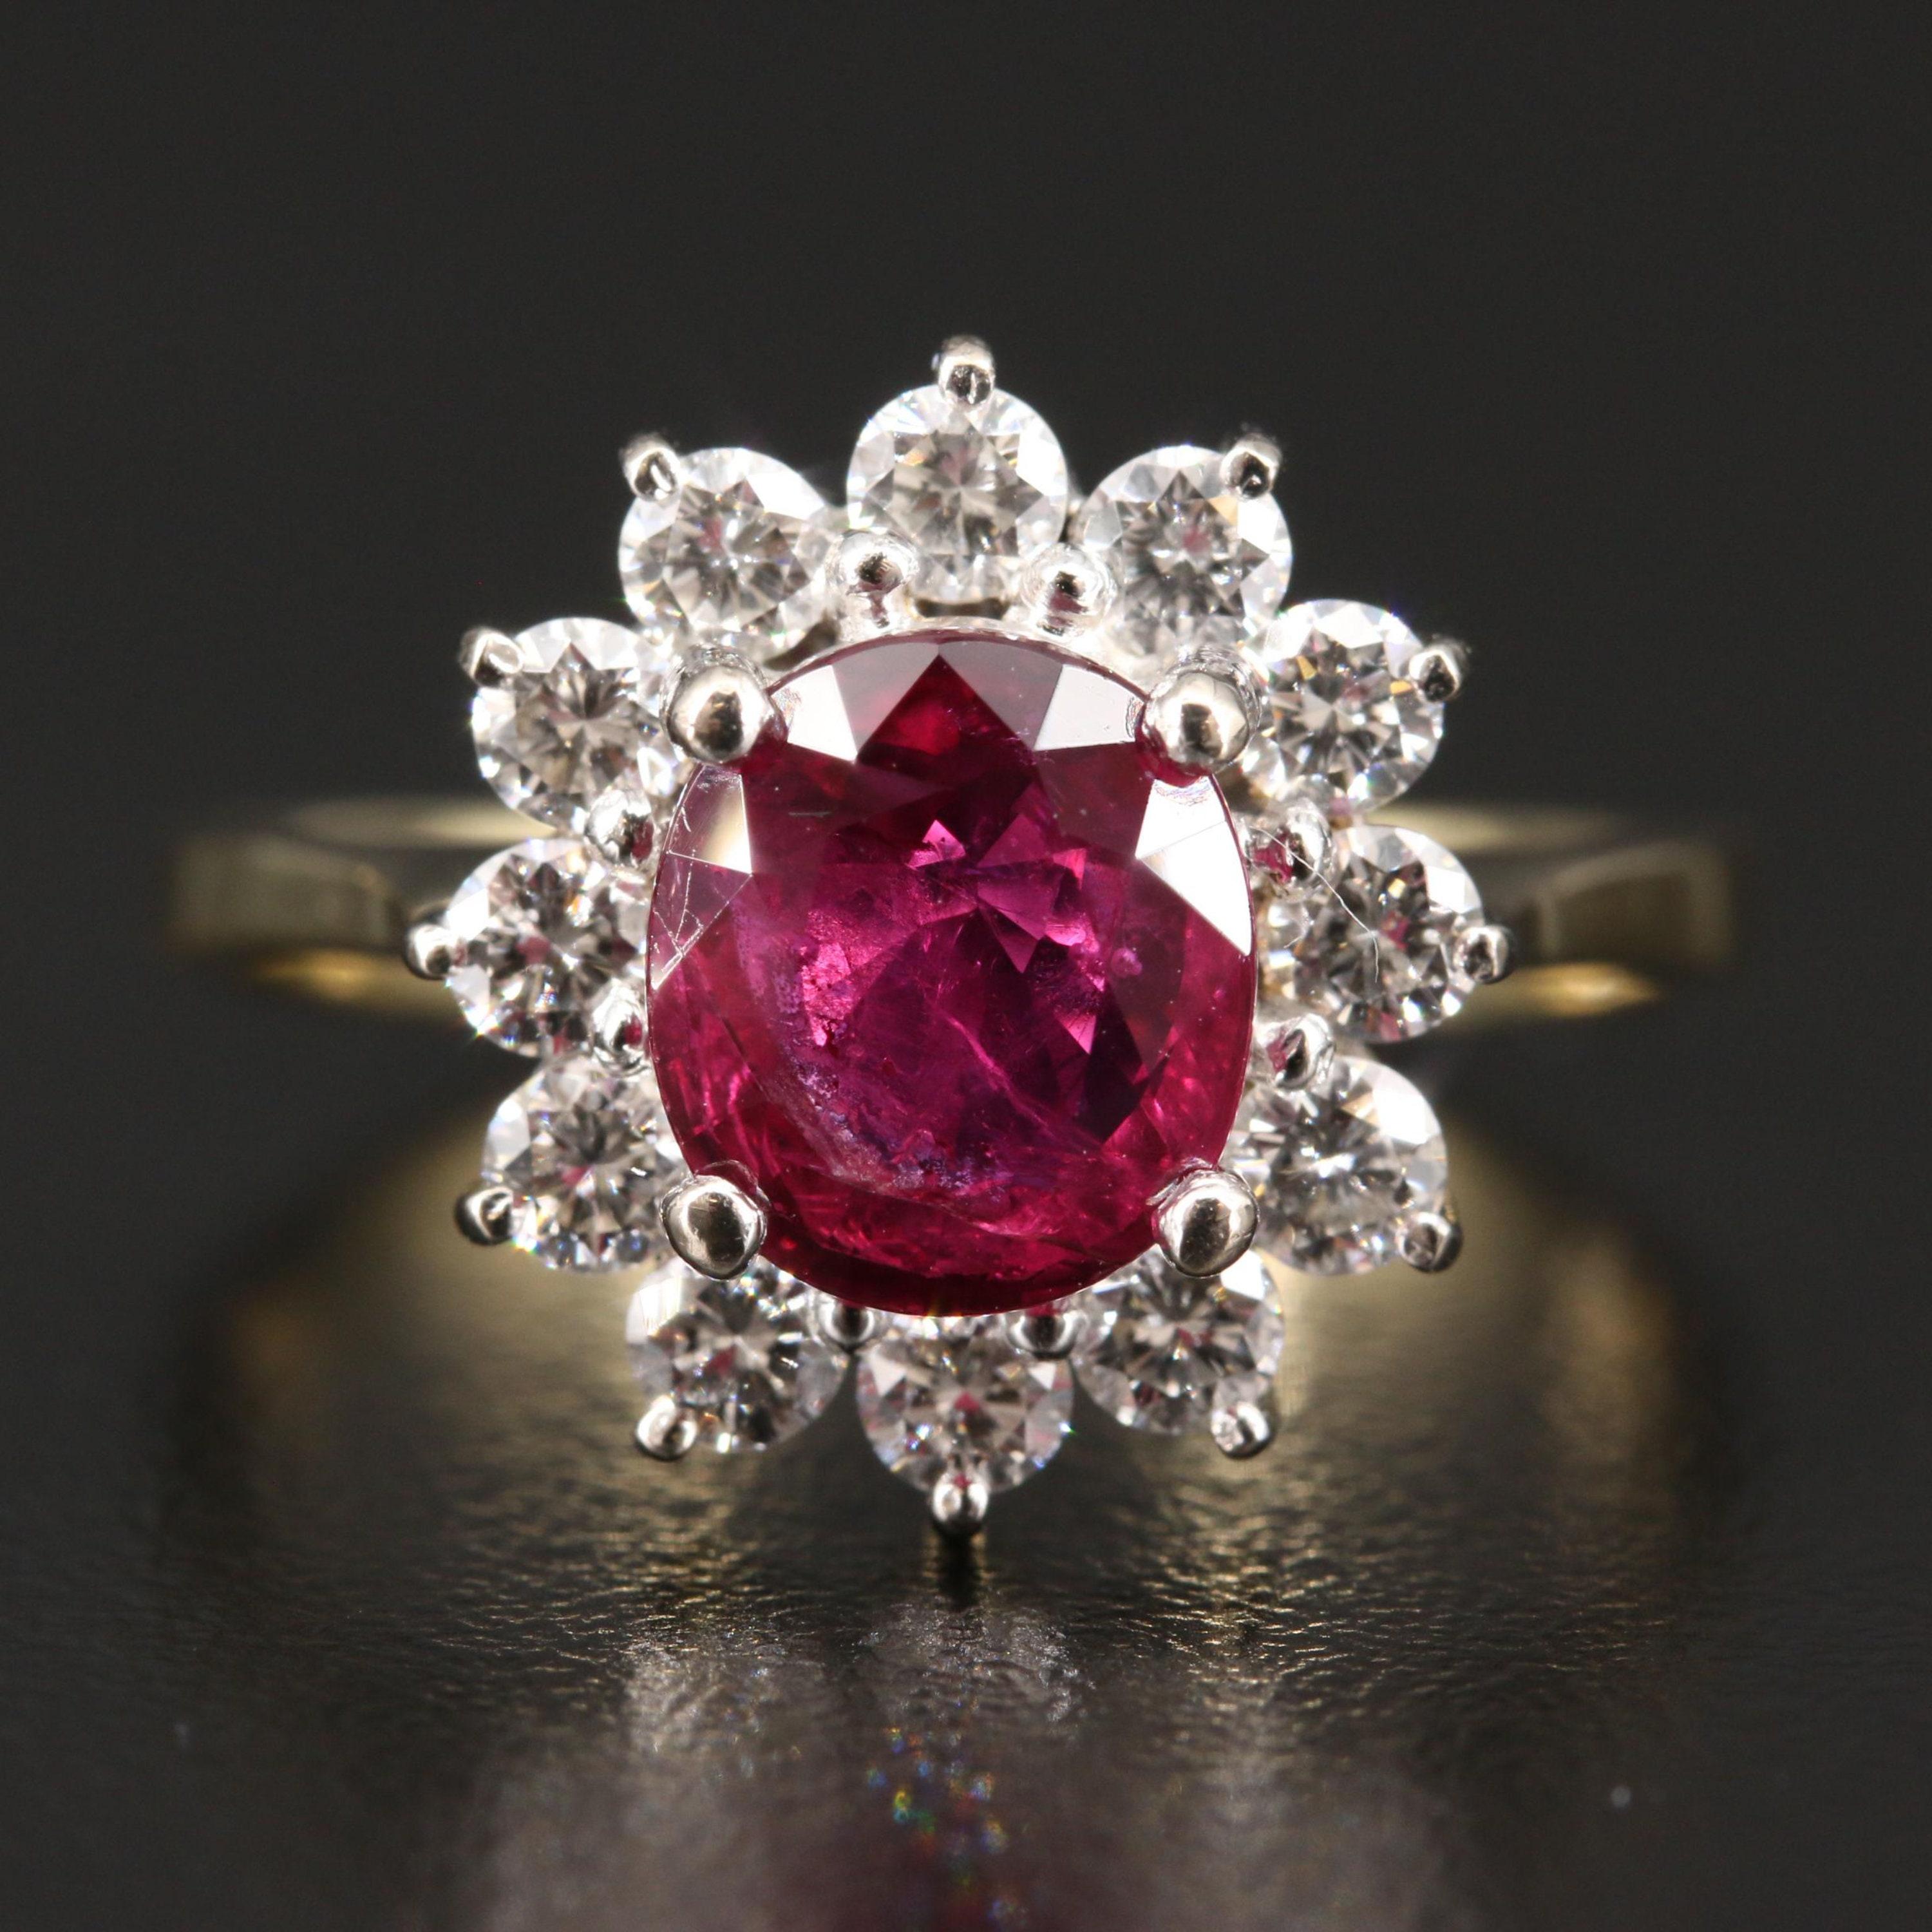 For Sale:  Certified 1.19 Carat Ruby Diamond Engagement Ring Floral Halo Ruby Bridal Ring 7